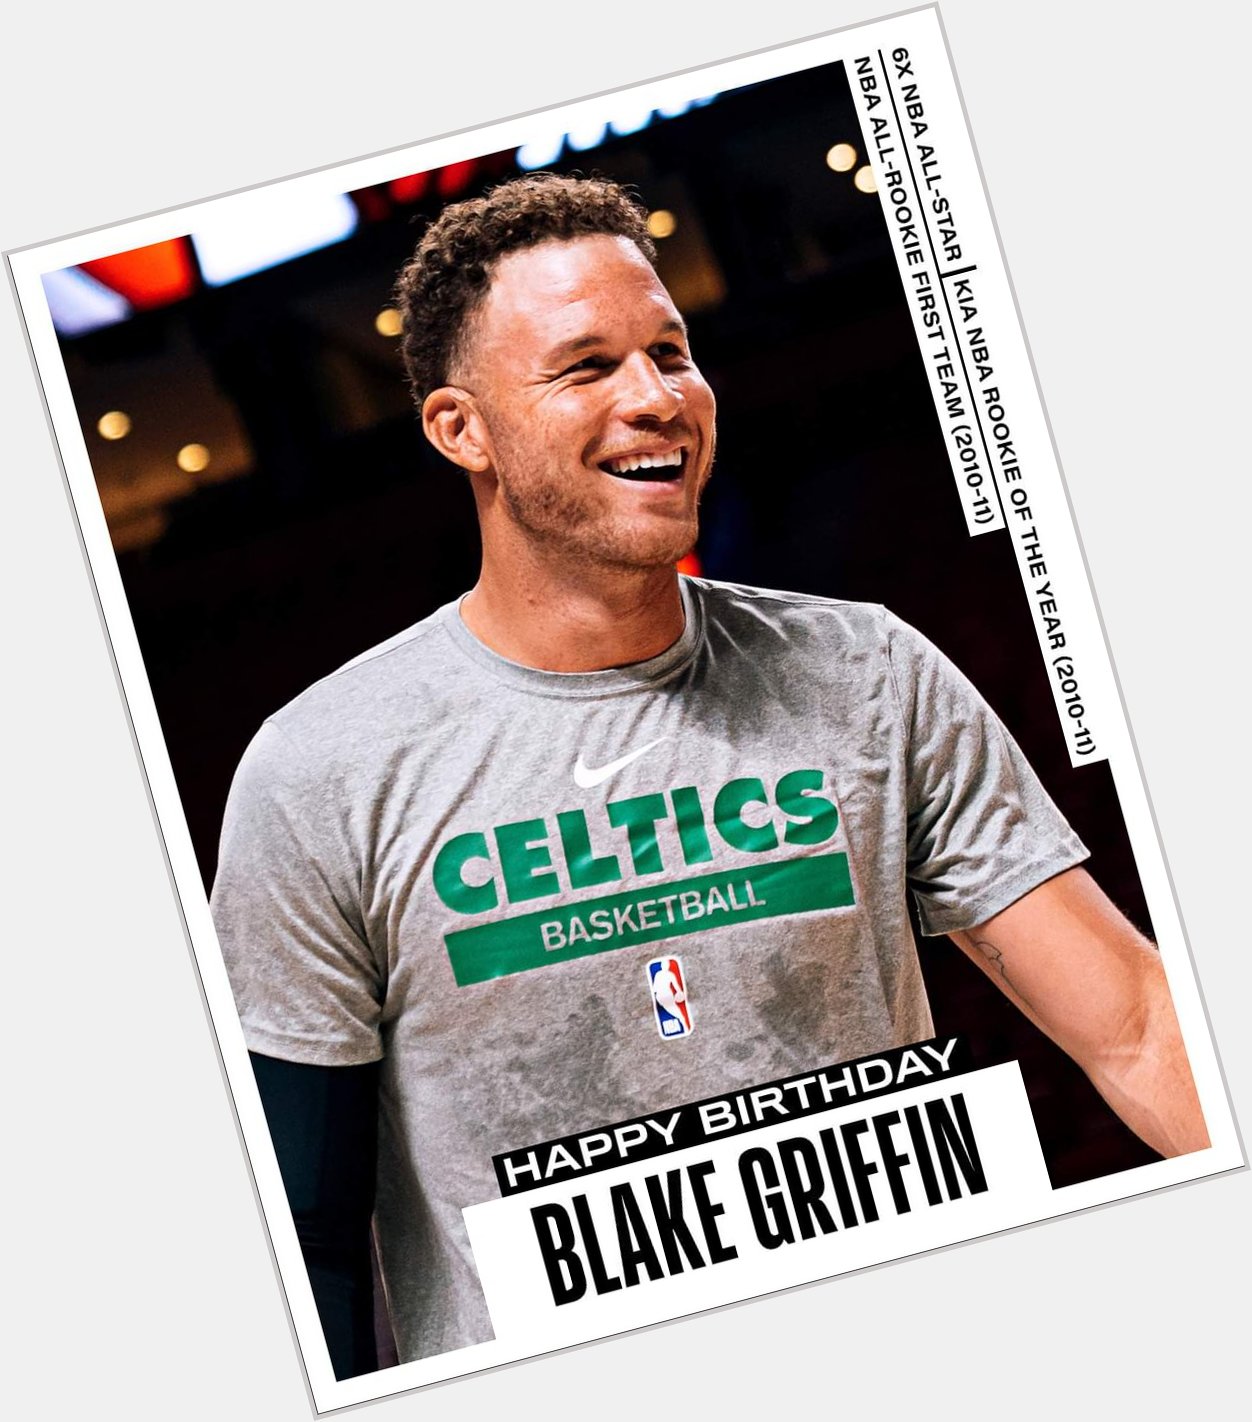 Join us in wishing Blake Griffin of the Boston Celtics a HAPPY 34th BIRTHDAY! 